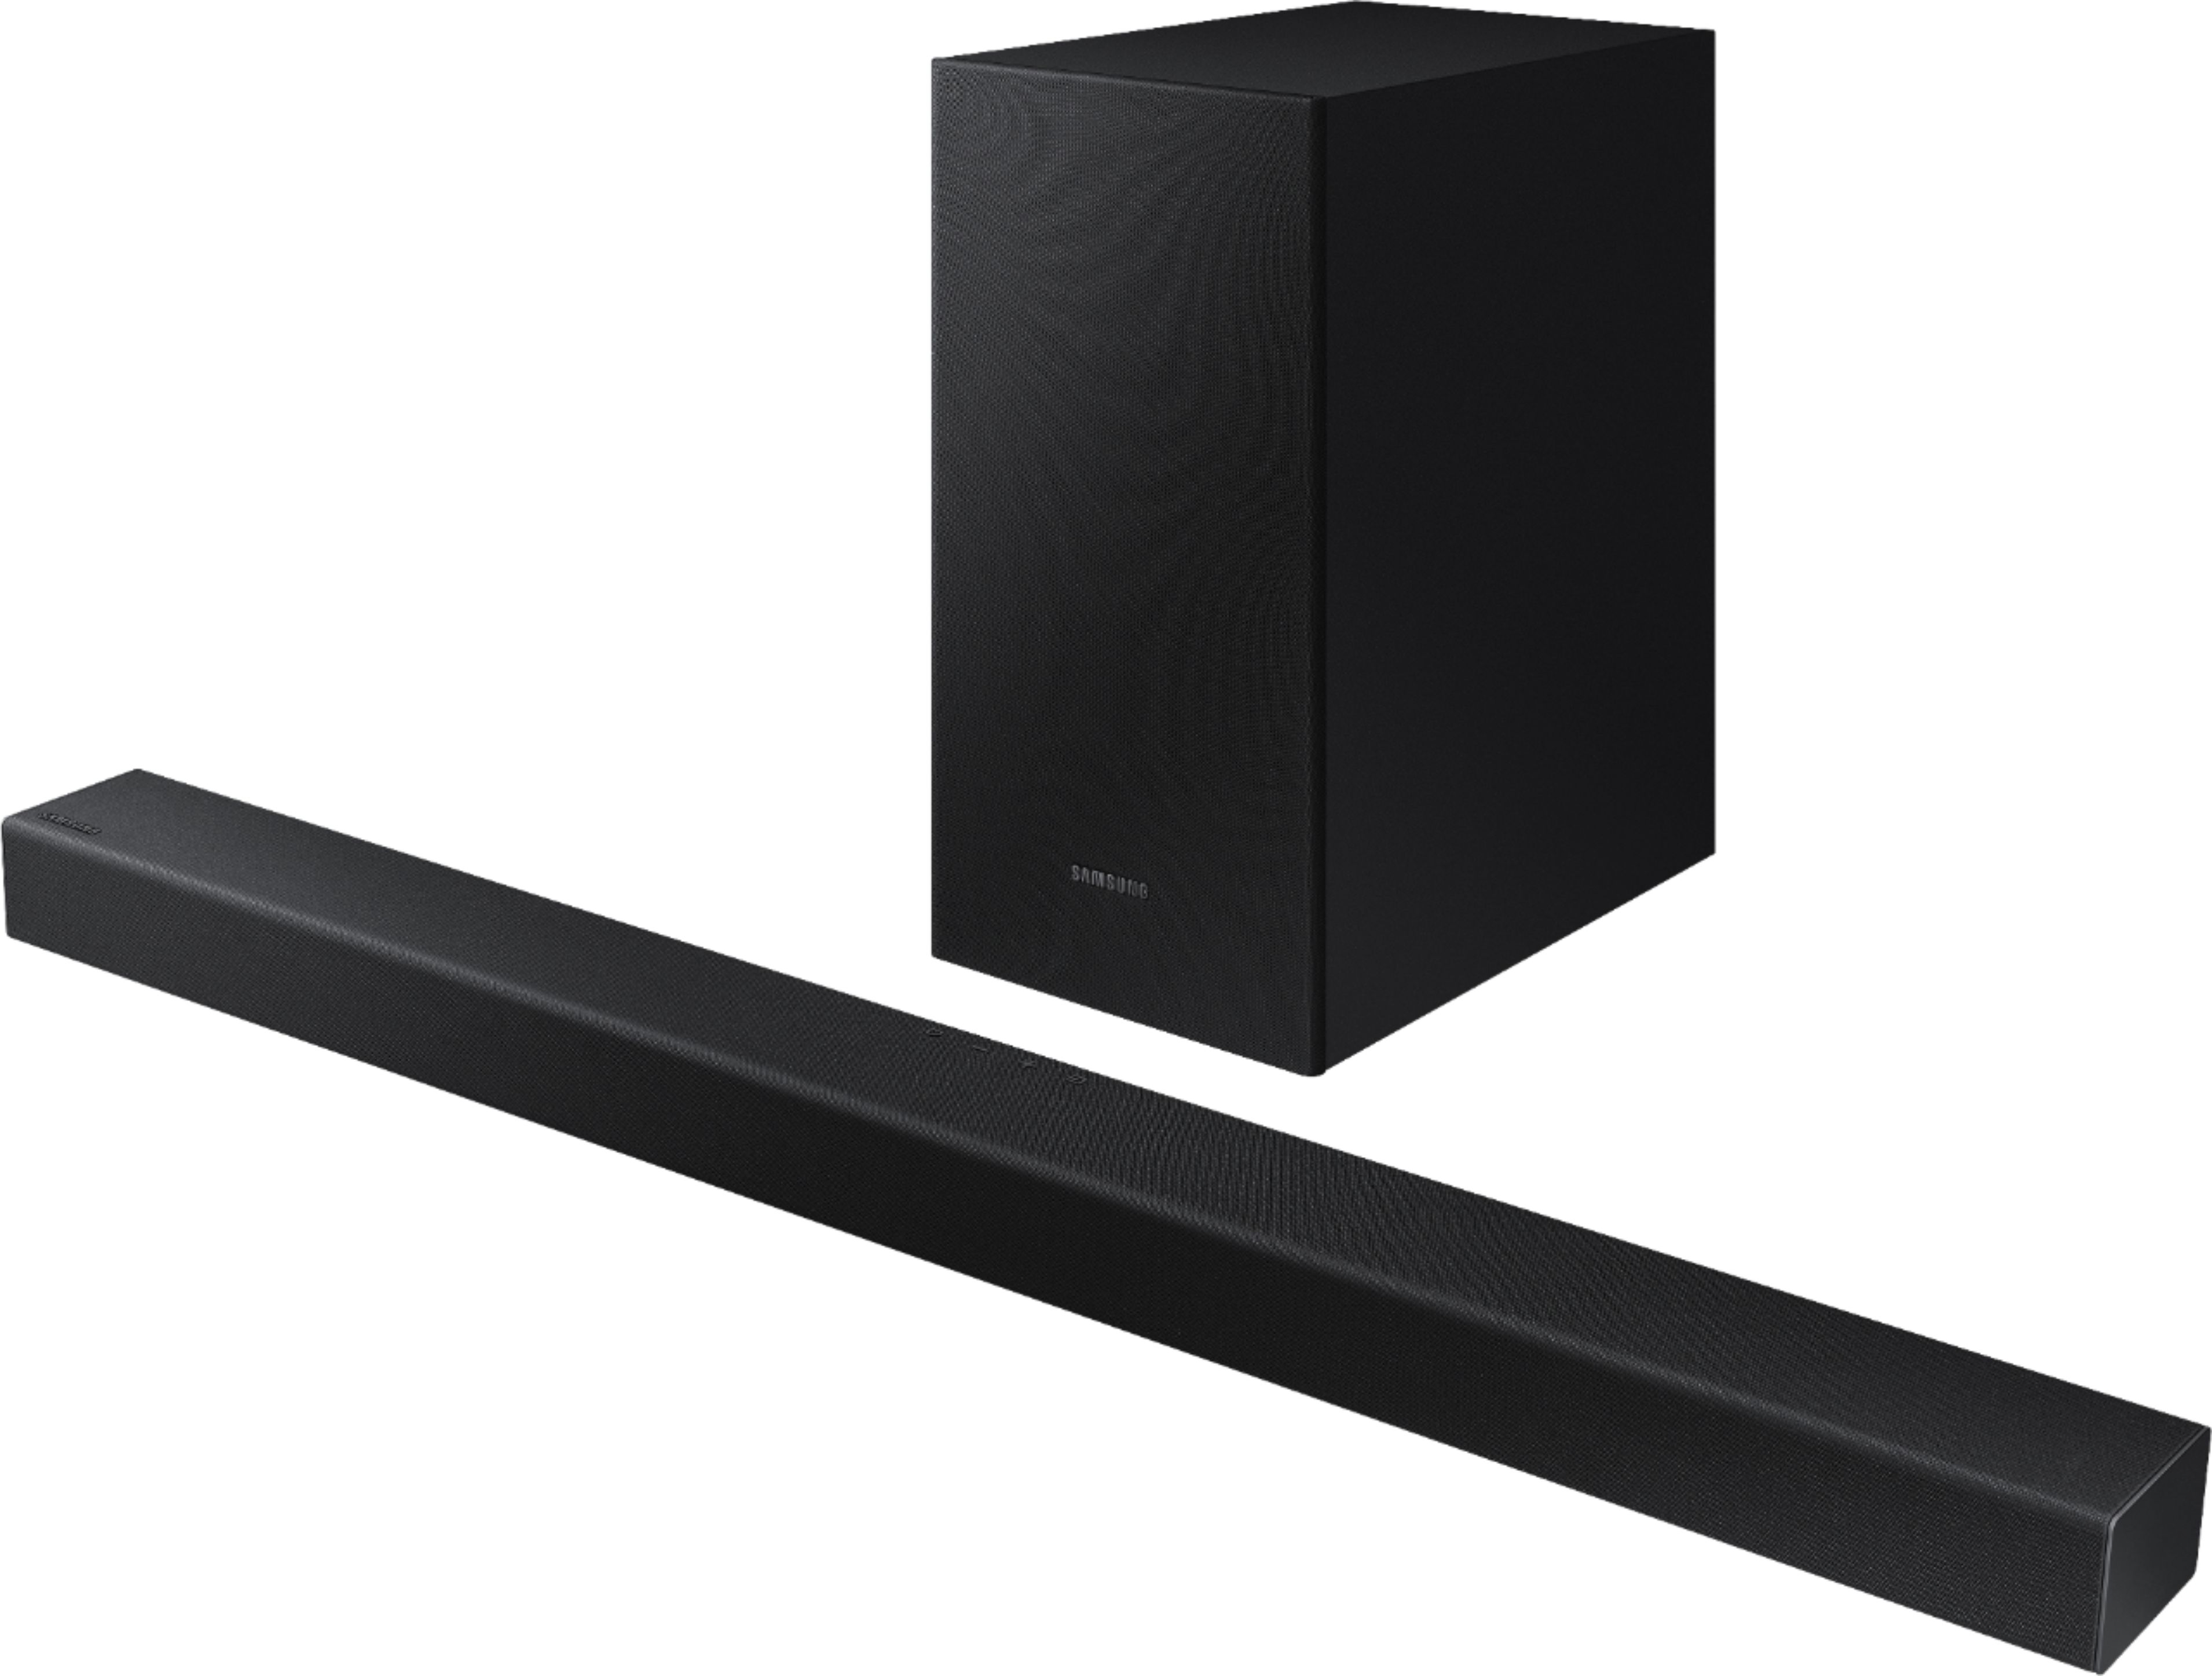 Angle View: Samsung - 2.0-Channel Soundbar with Built-in Subwoofer and Dolby Audio - Black